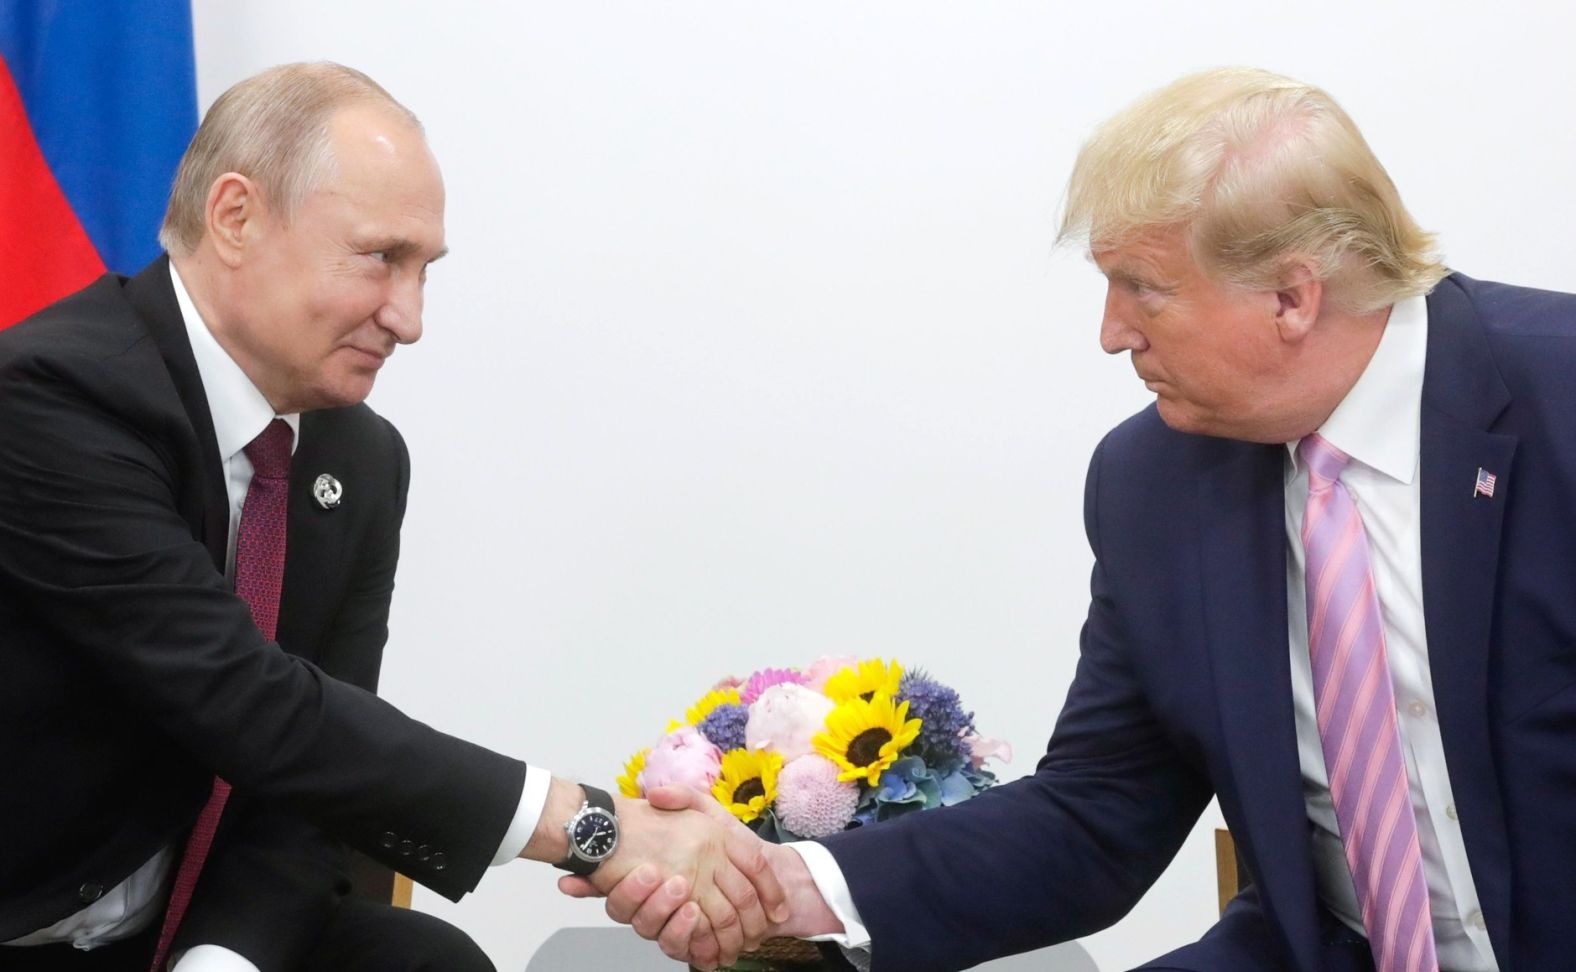 US President Donald Trump meets Russian President Vladimir Putin on the first day of the G20 summit on Friday.